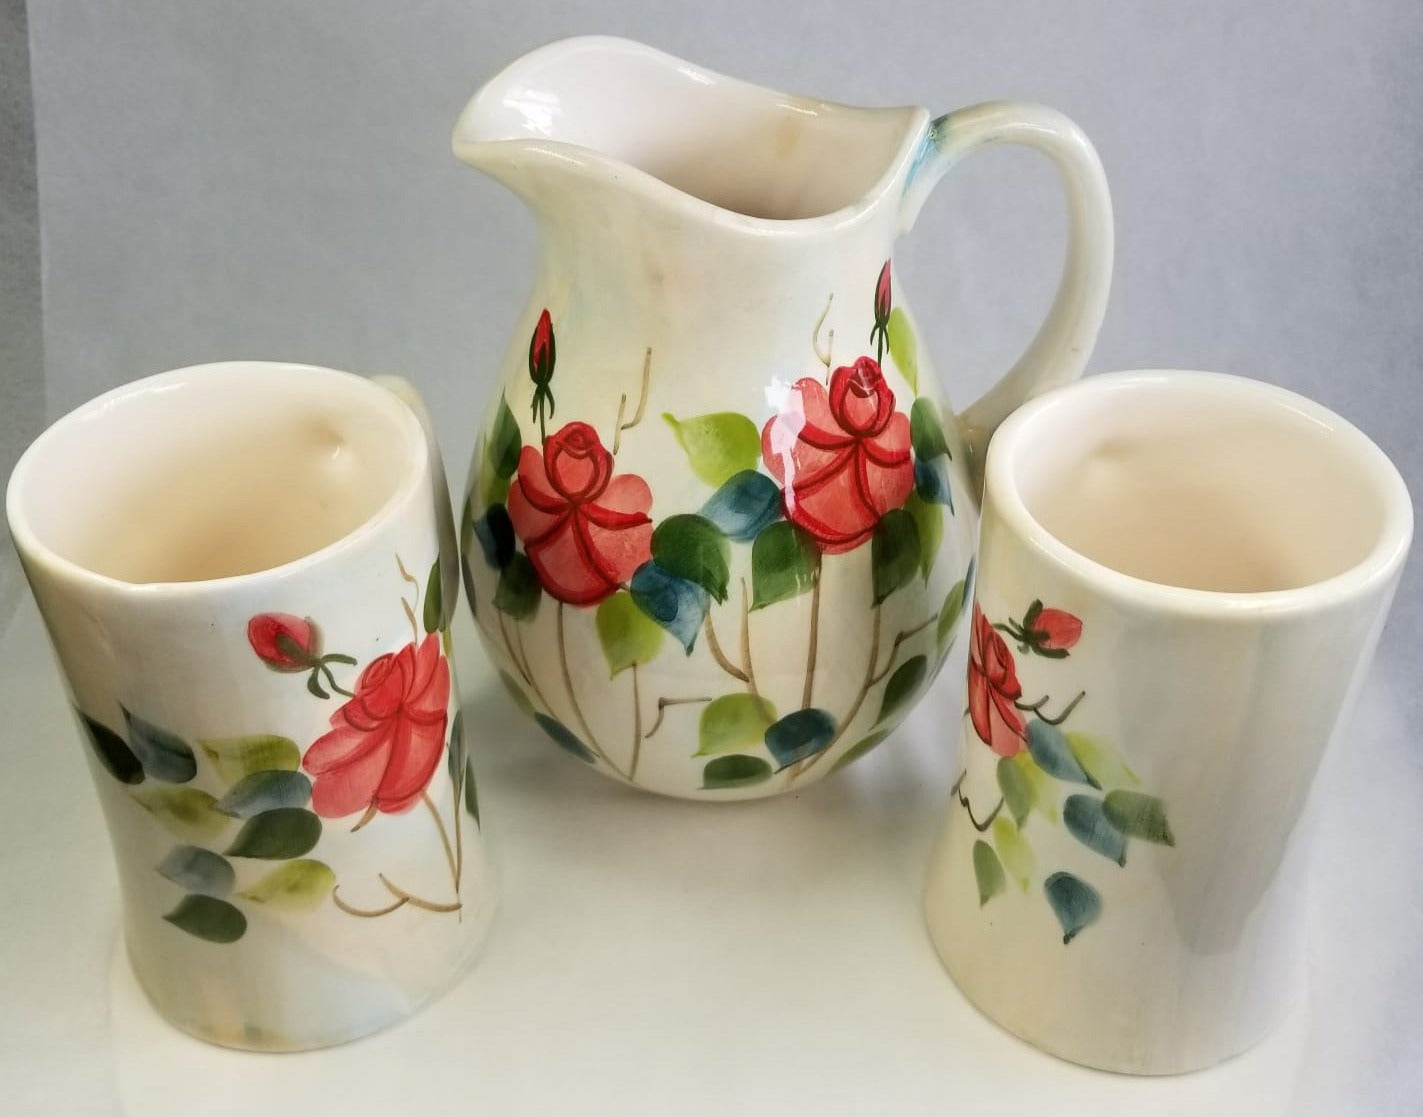 Red Flower Ceramic Jug and Cups - HighTouch 